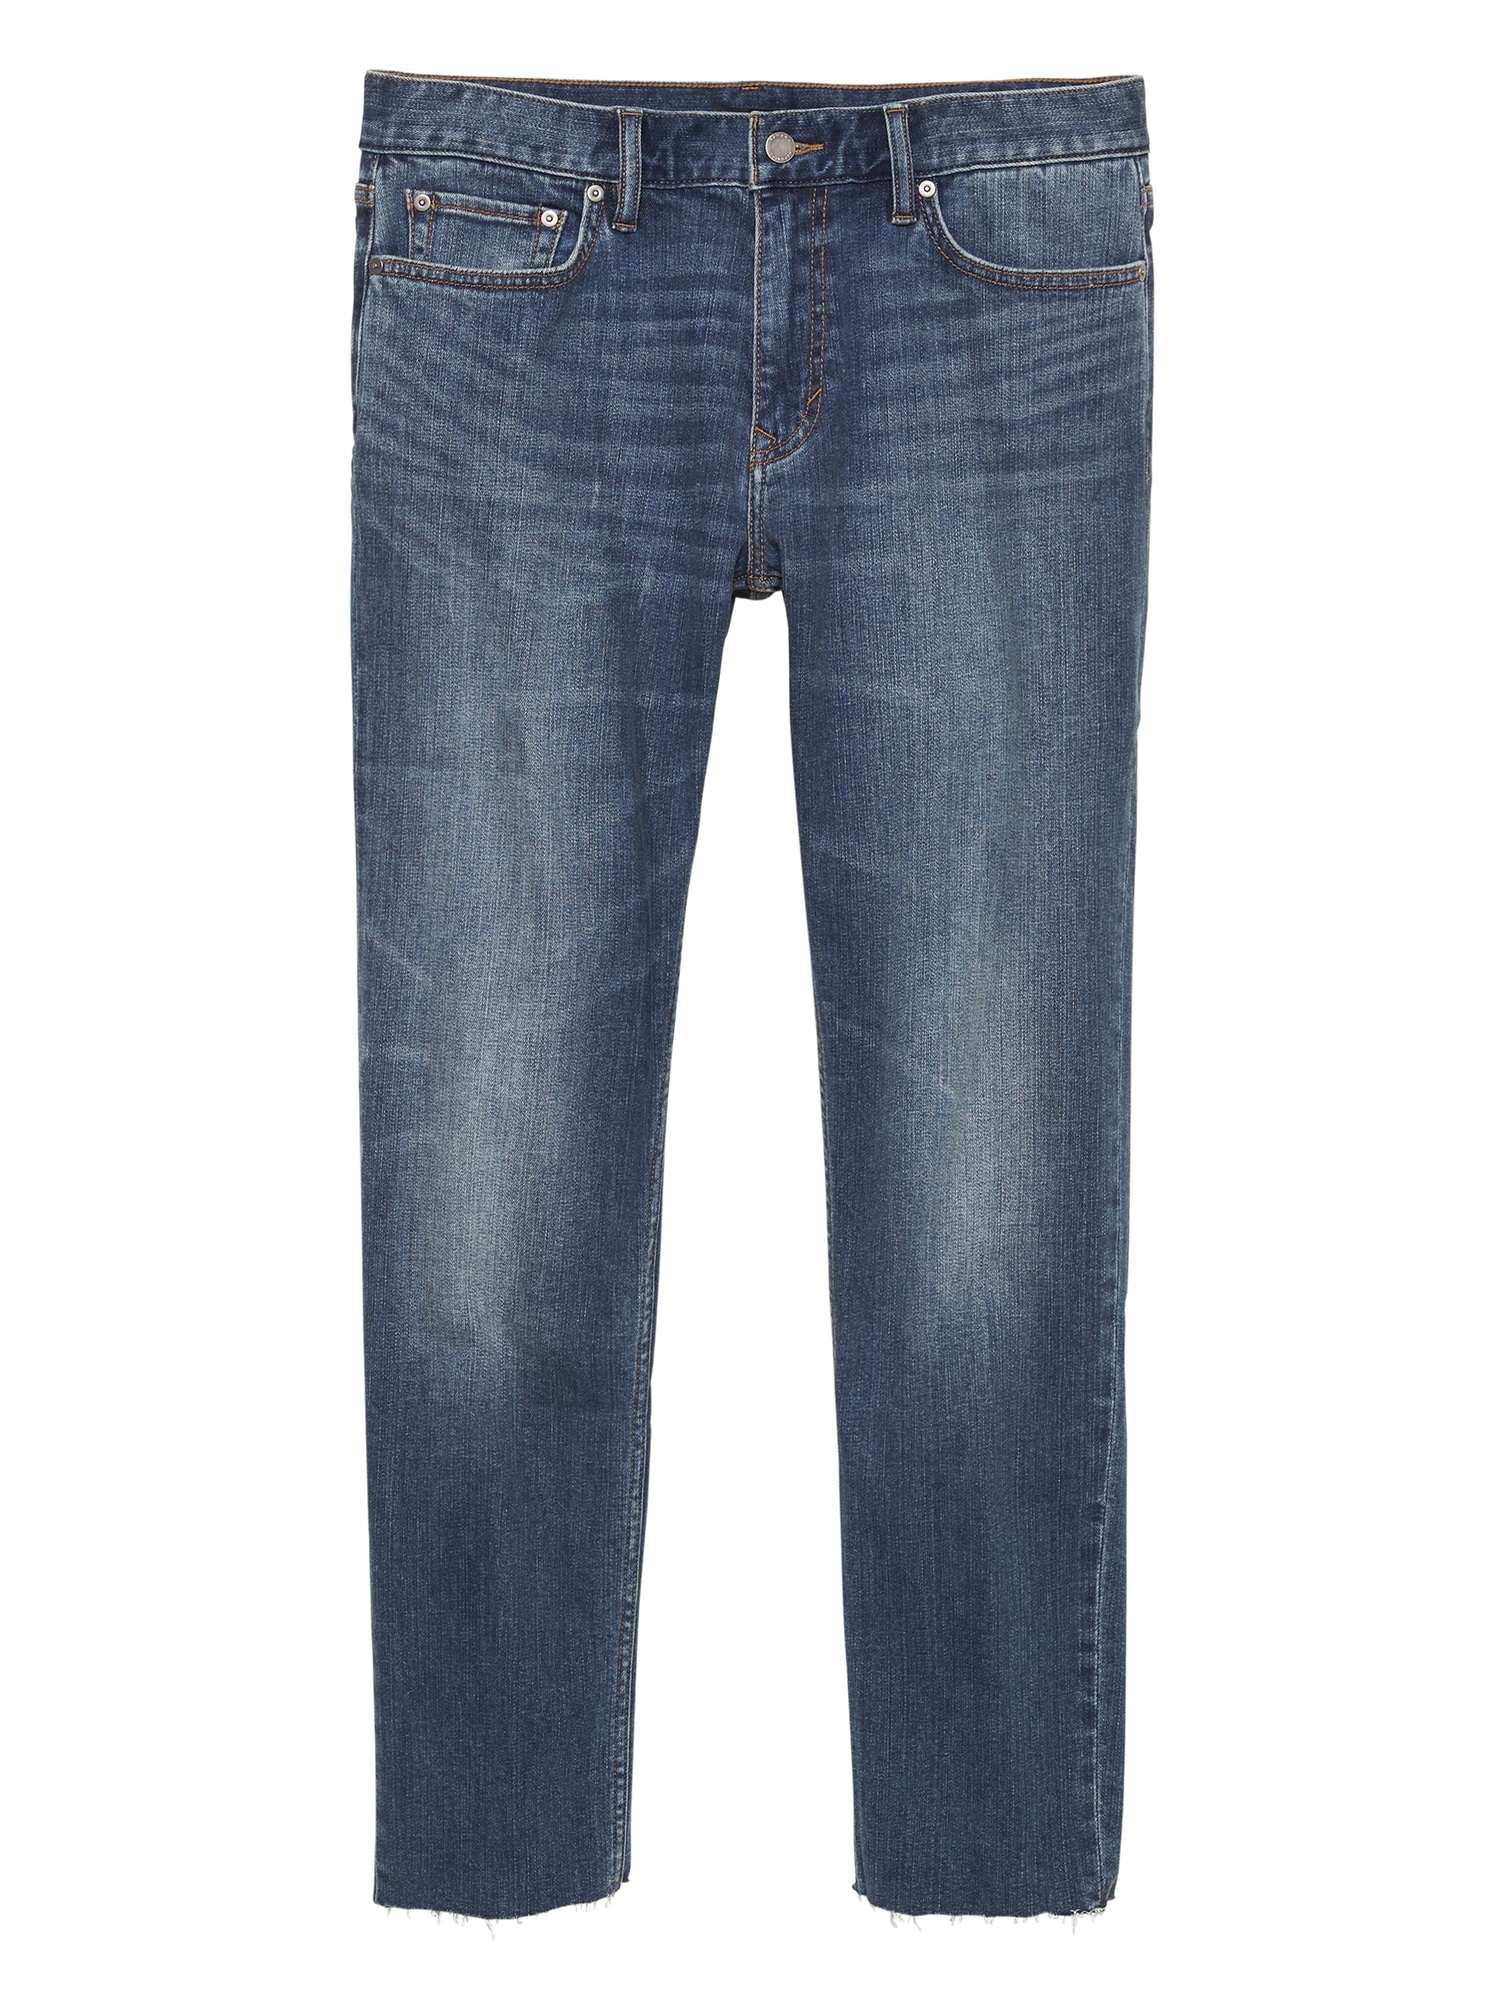 Athletic Tapered Rapid Movement Denim Cropped Jean